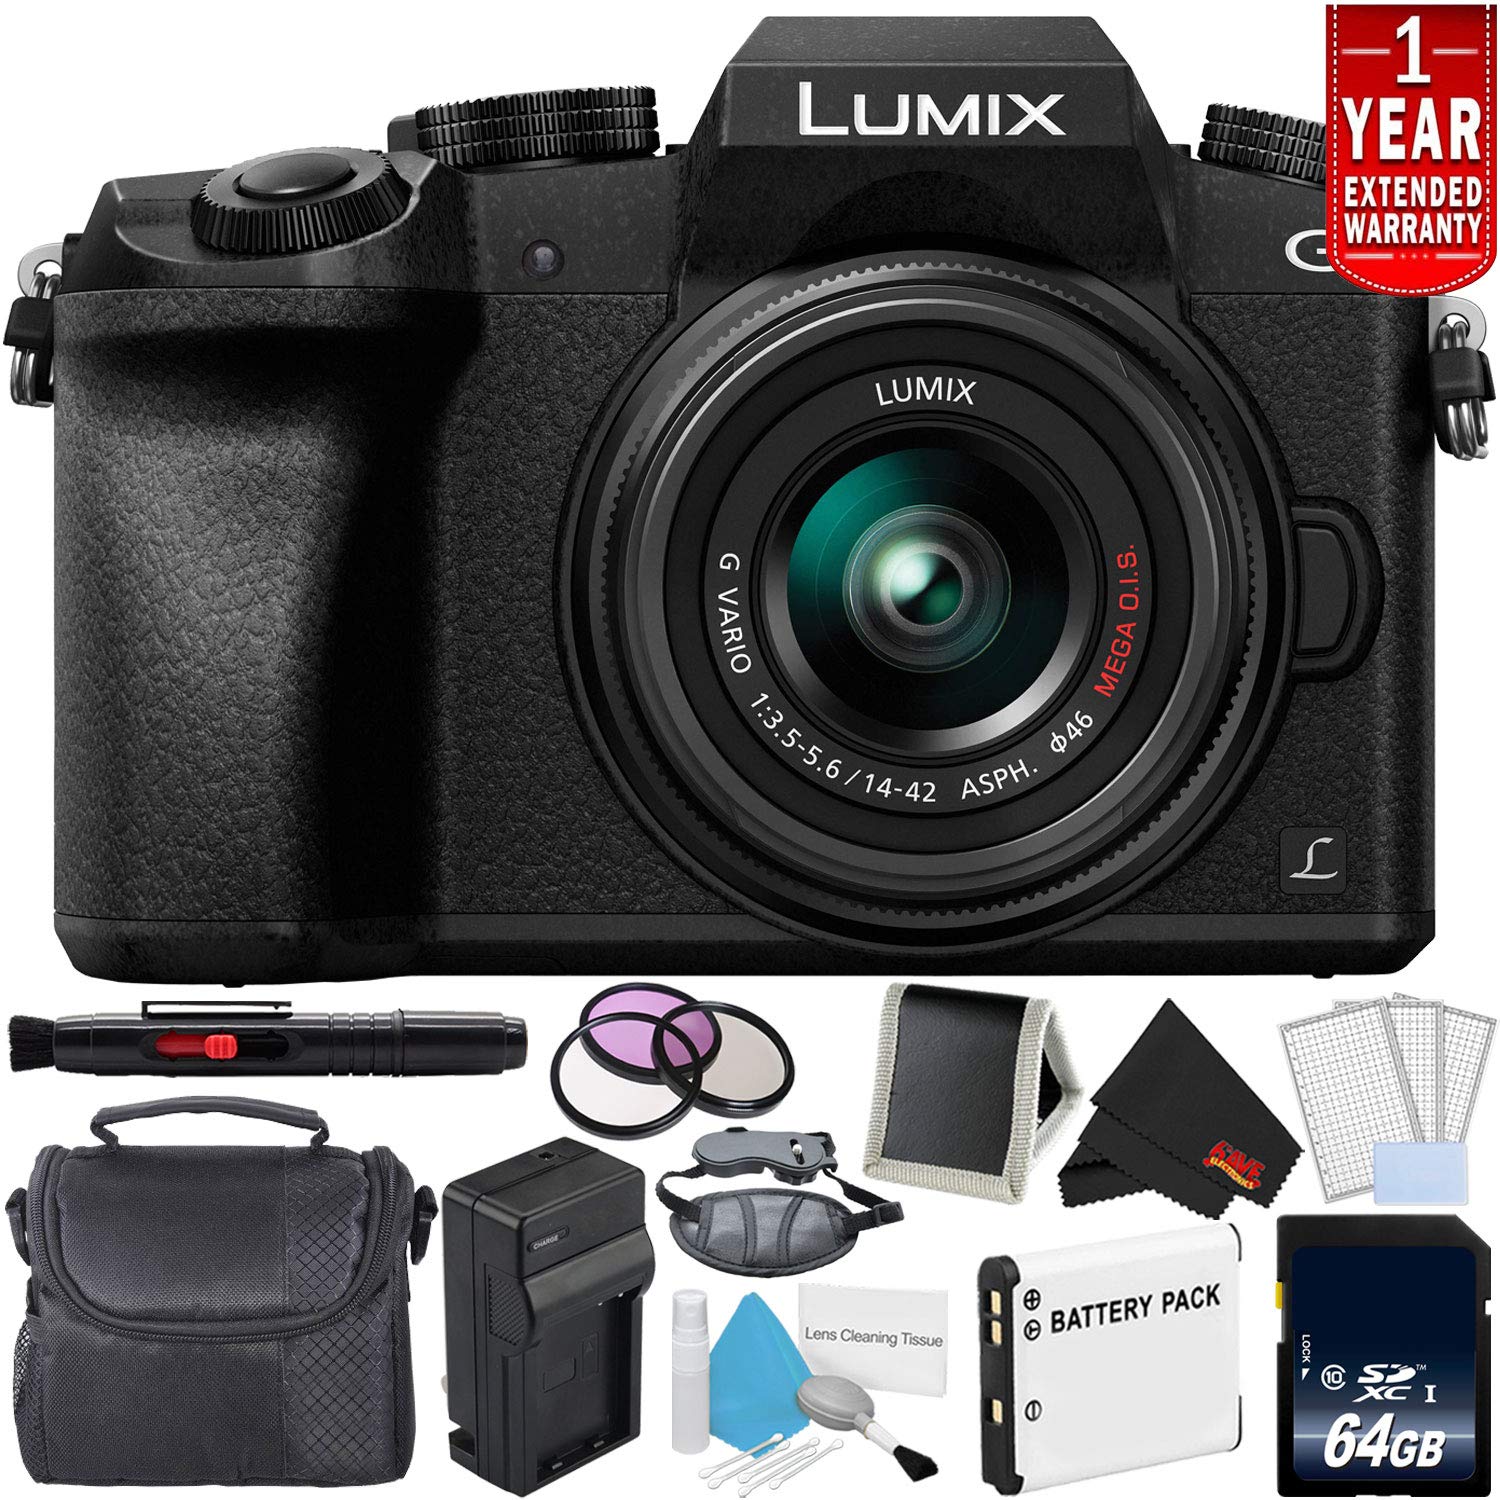 Panasonic Lumix DMC-G7 Mirrorless Digital Camera with 14-42mm Lens - Bundle with 1 Year Extended Warranty, 64GB Memory C